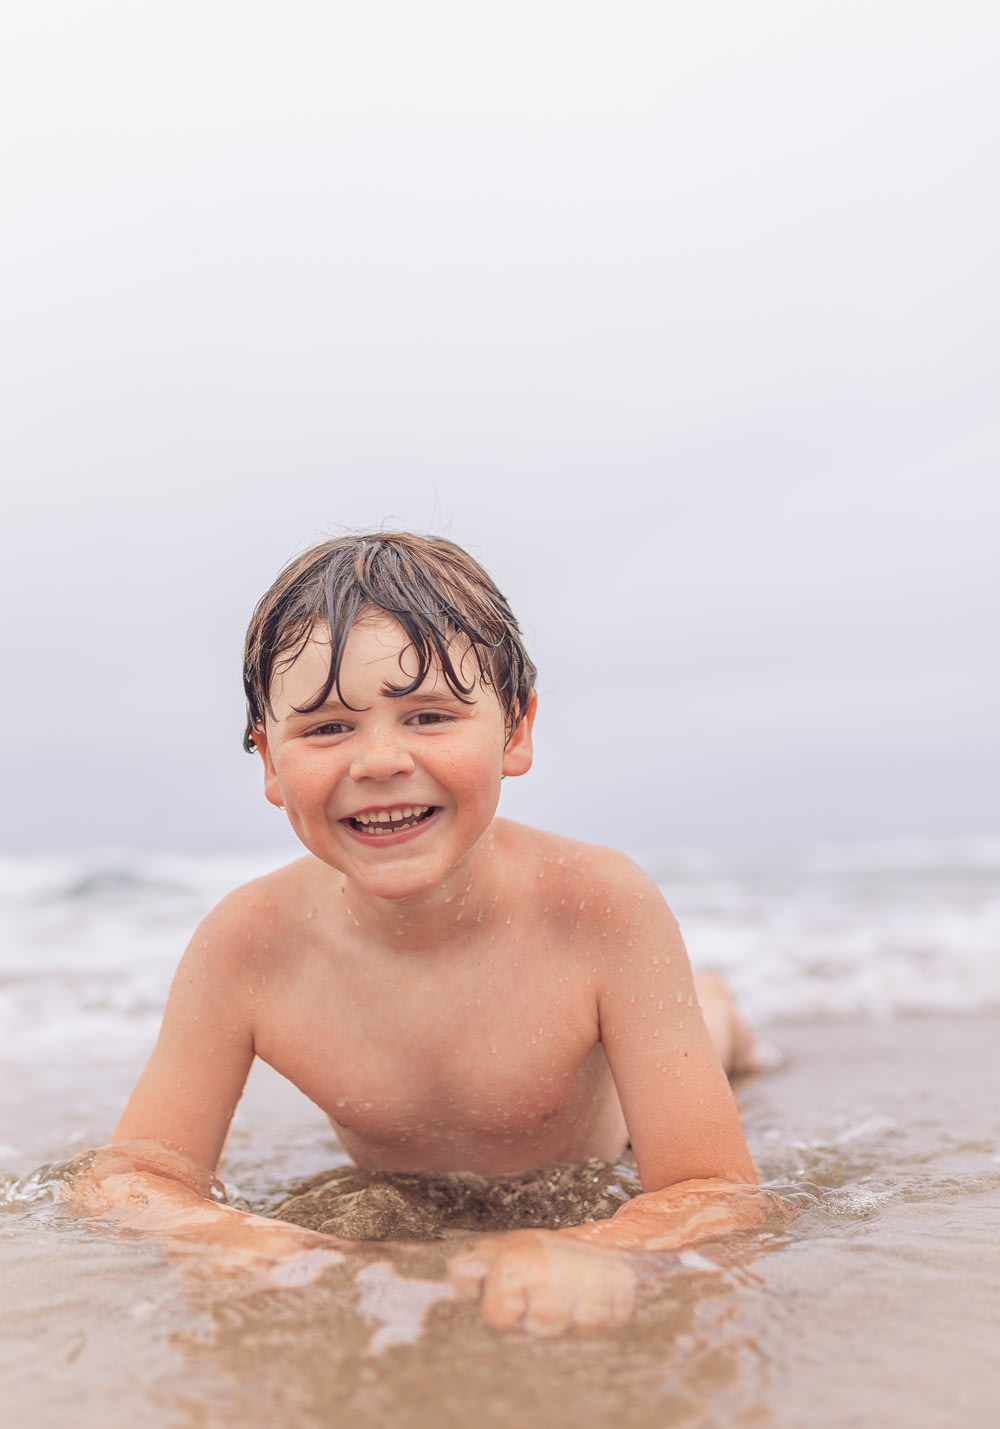 a young boy is playing in the water at the beach